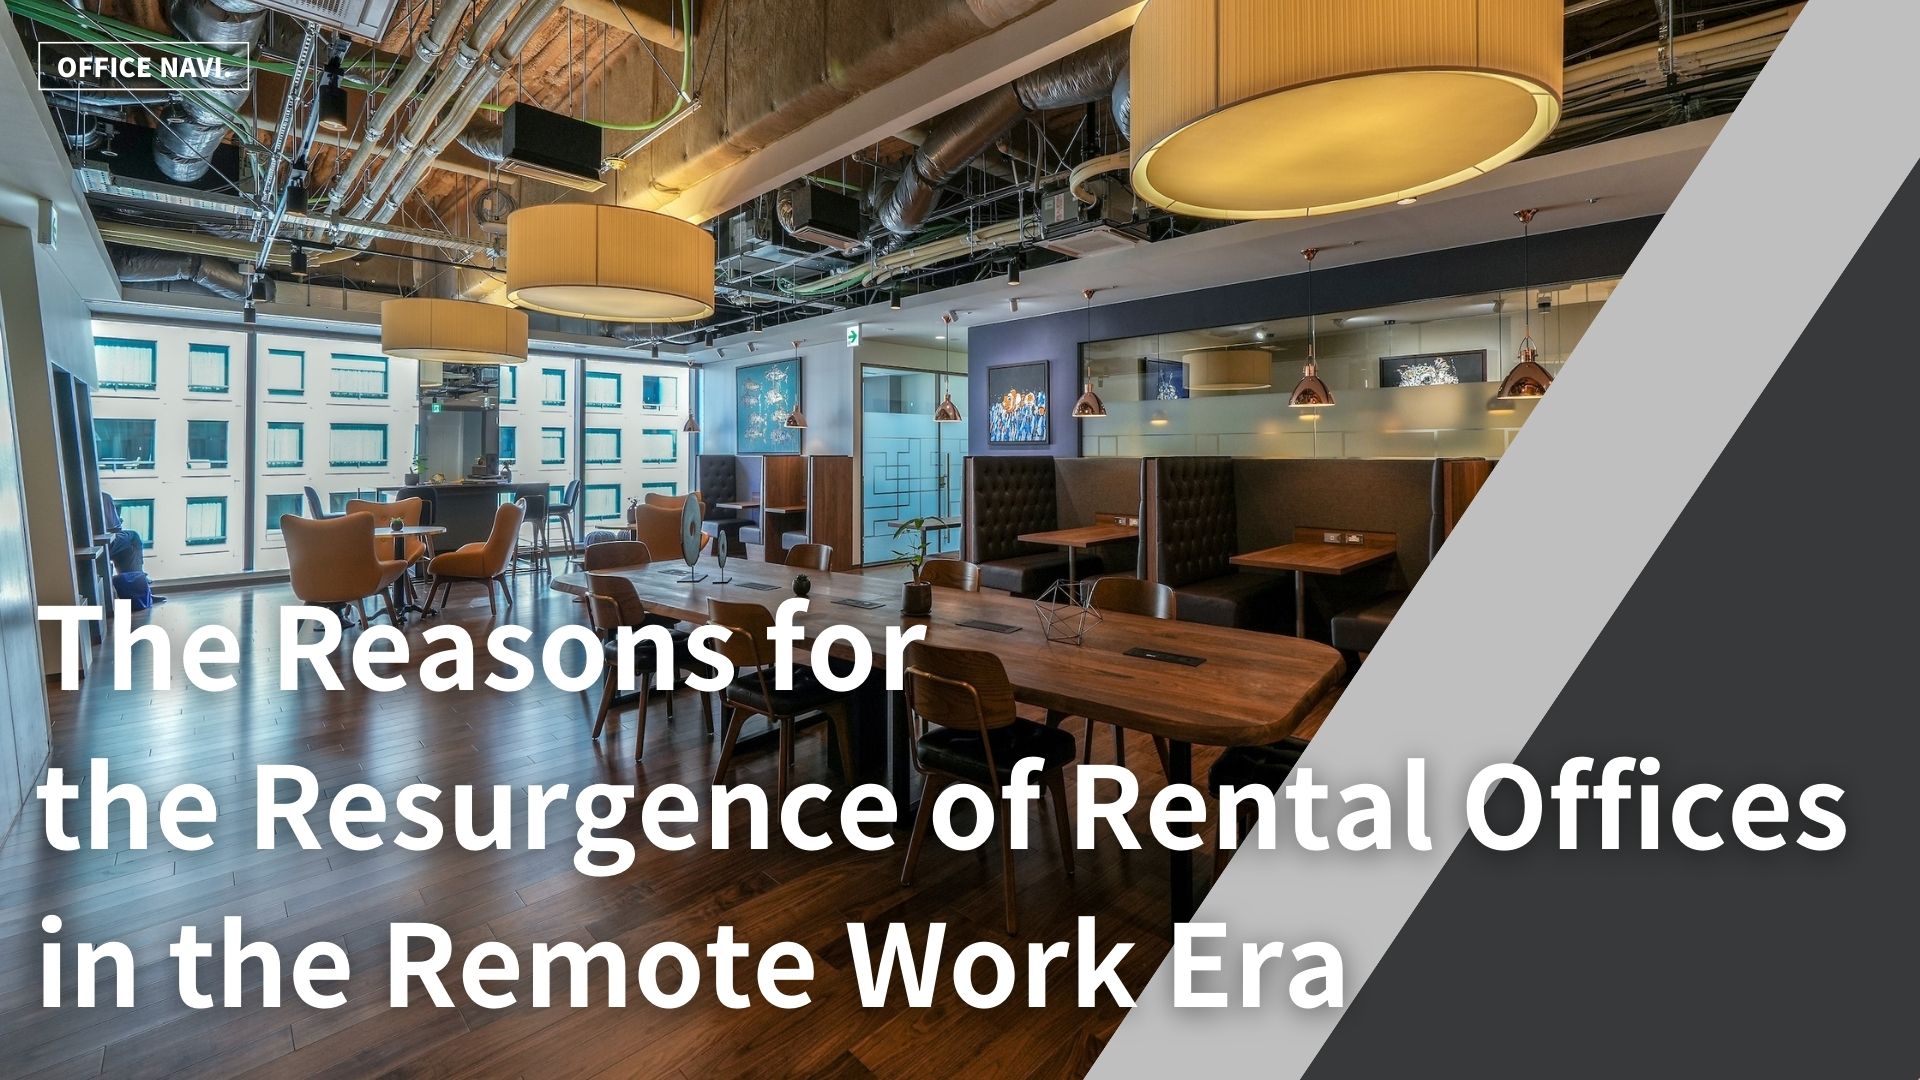 The Reasons for the Resurgence of Rental Offices in the Remote Work Era